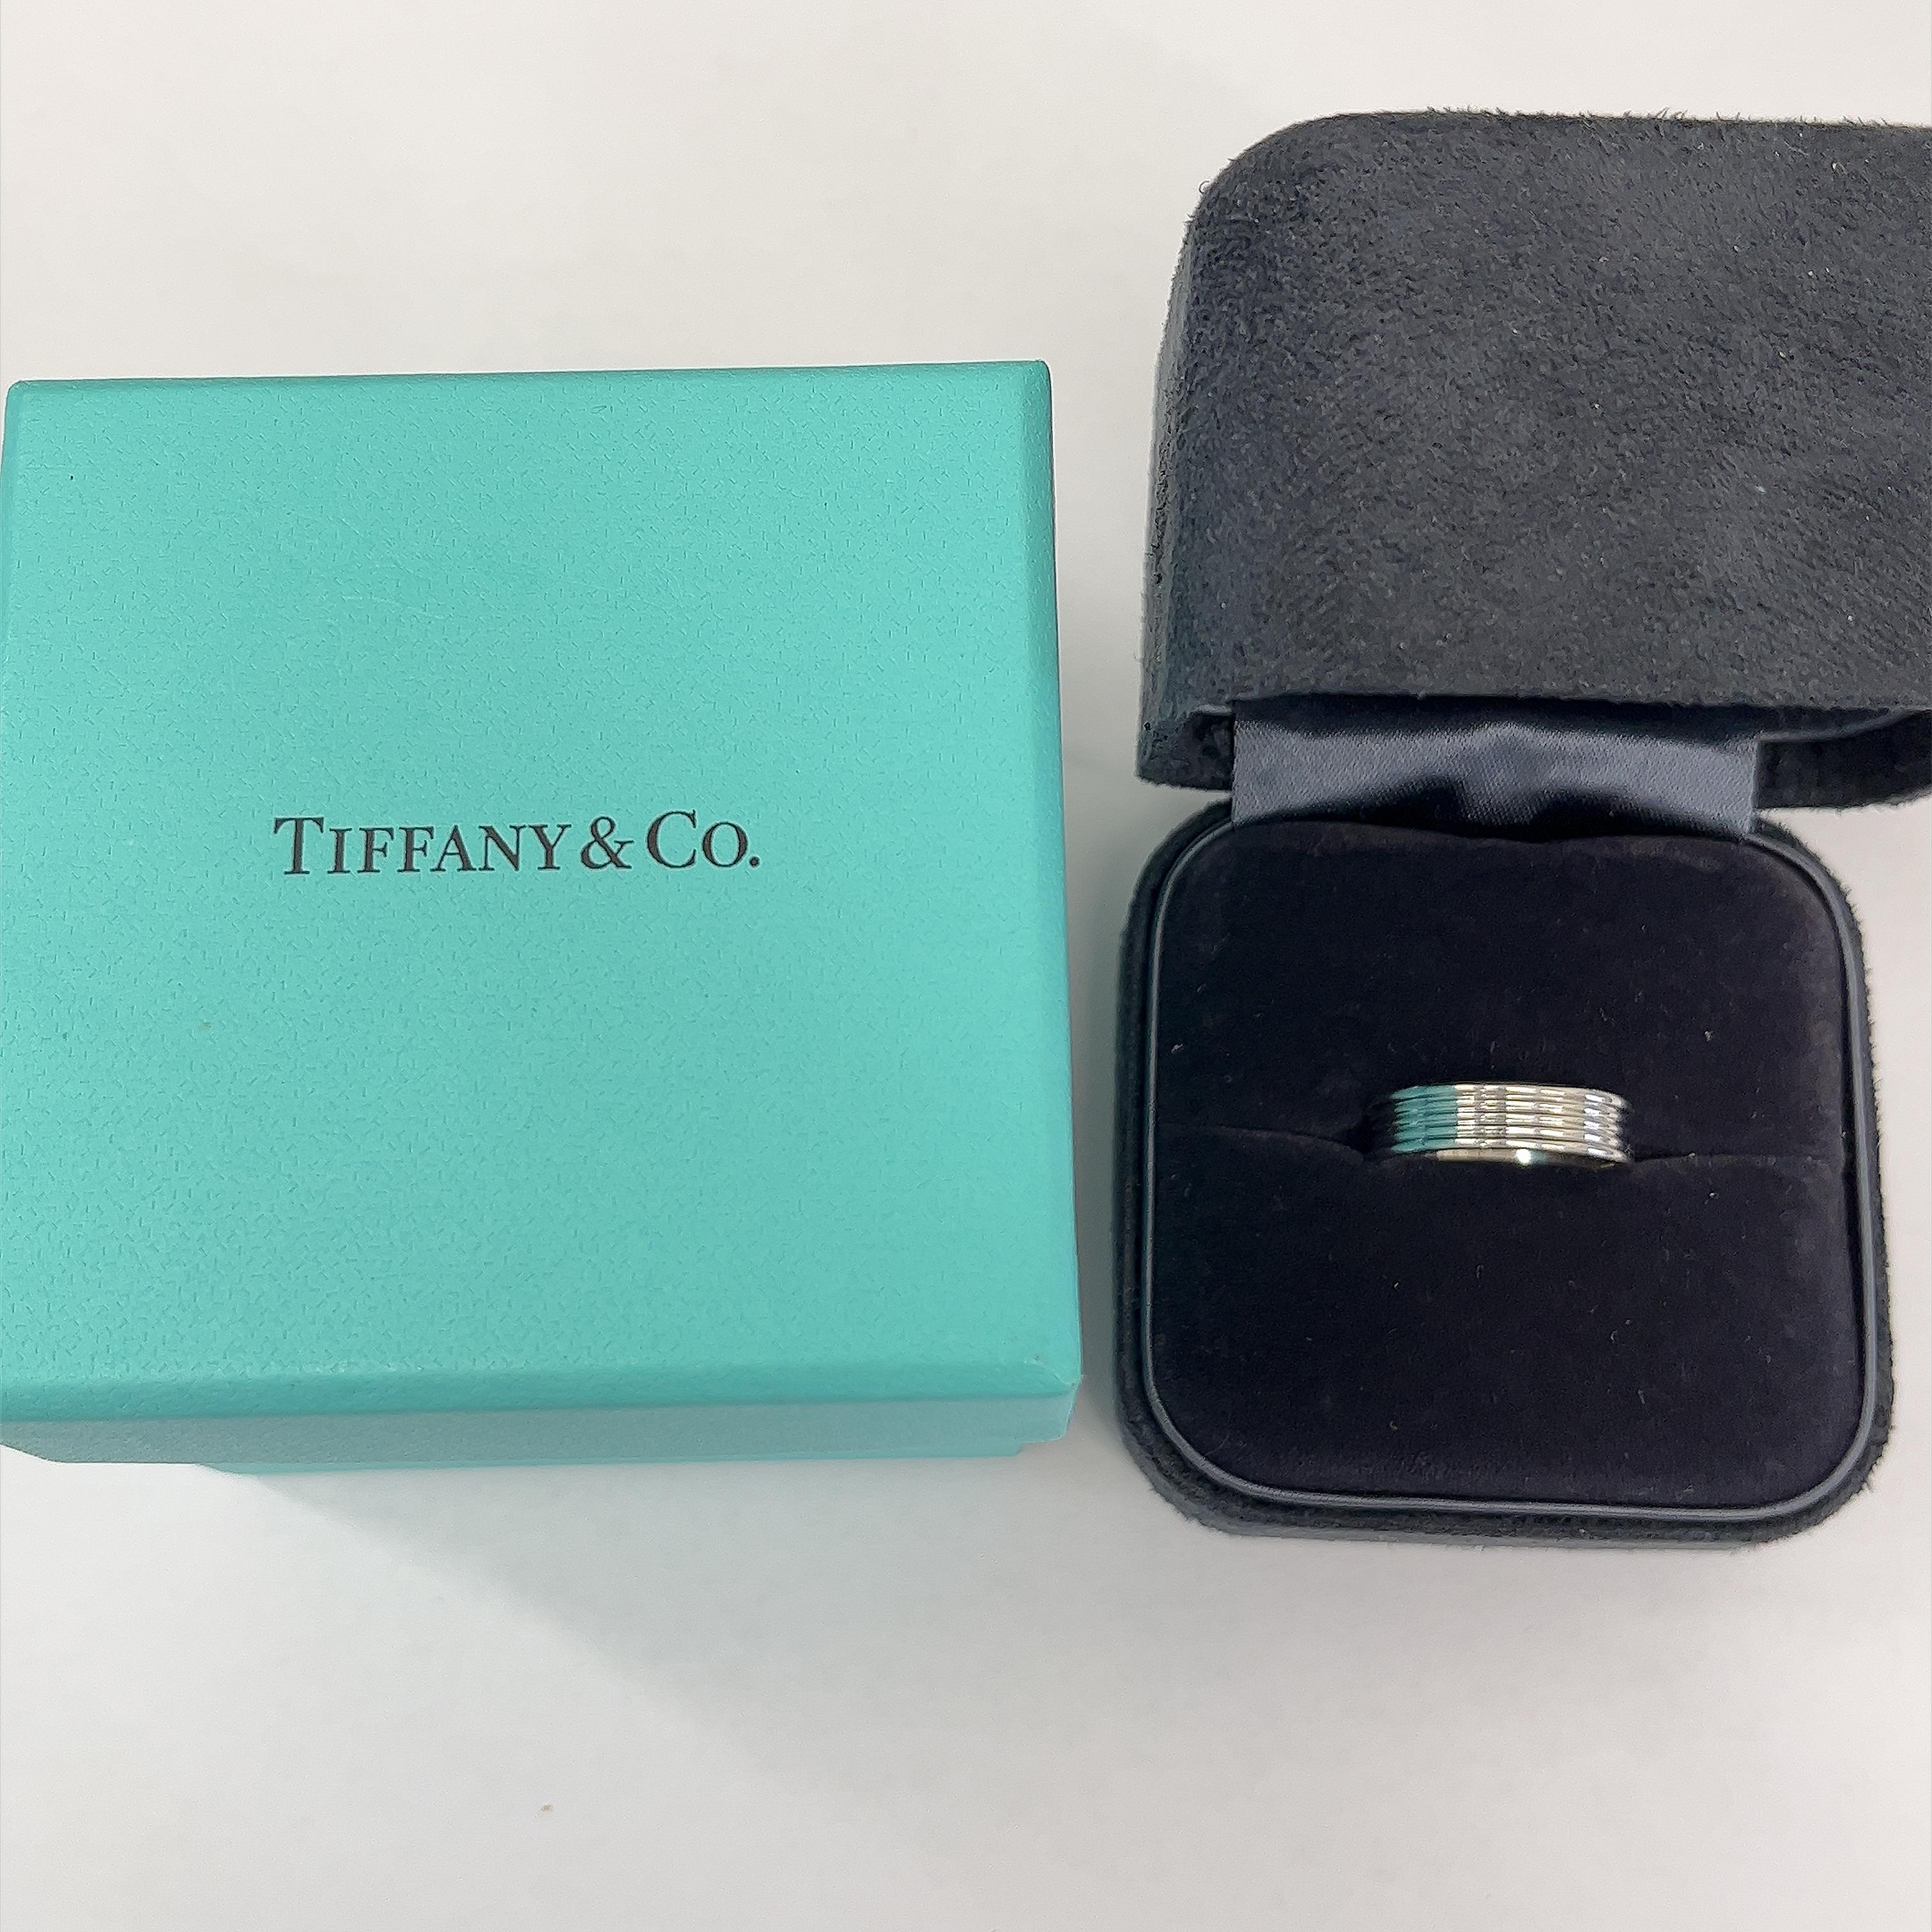 Embrace sophistication with the Tiffany & Co. 5 Row Band Ring in platinum. This stunning piece features five rows of sleek metal, meticulously crafted to create a timeless and versatile accessory. With its luxurious design and enduring elegance,